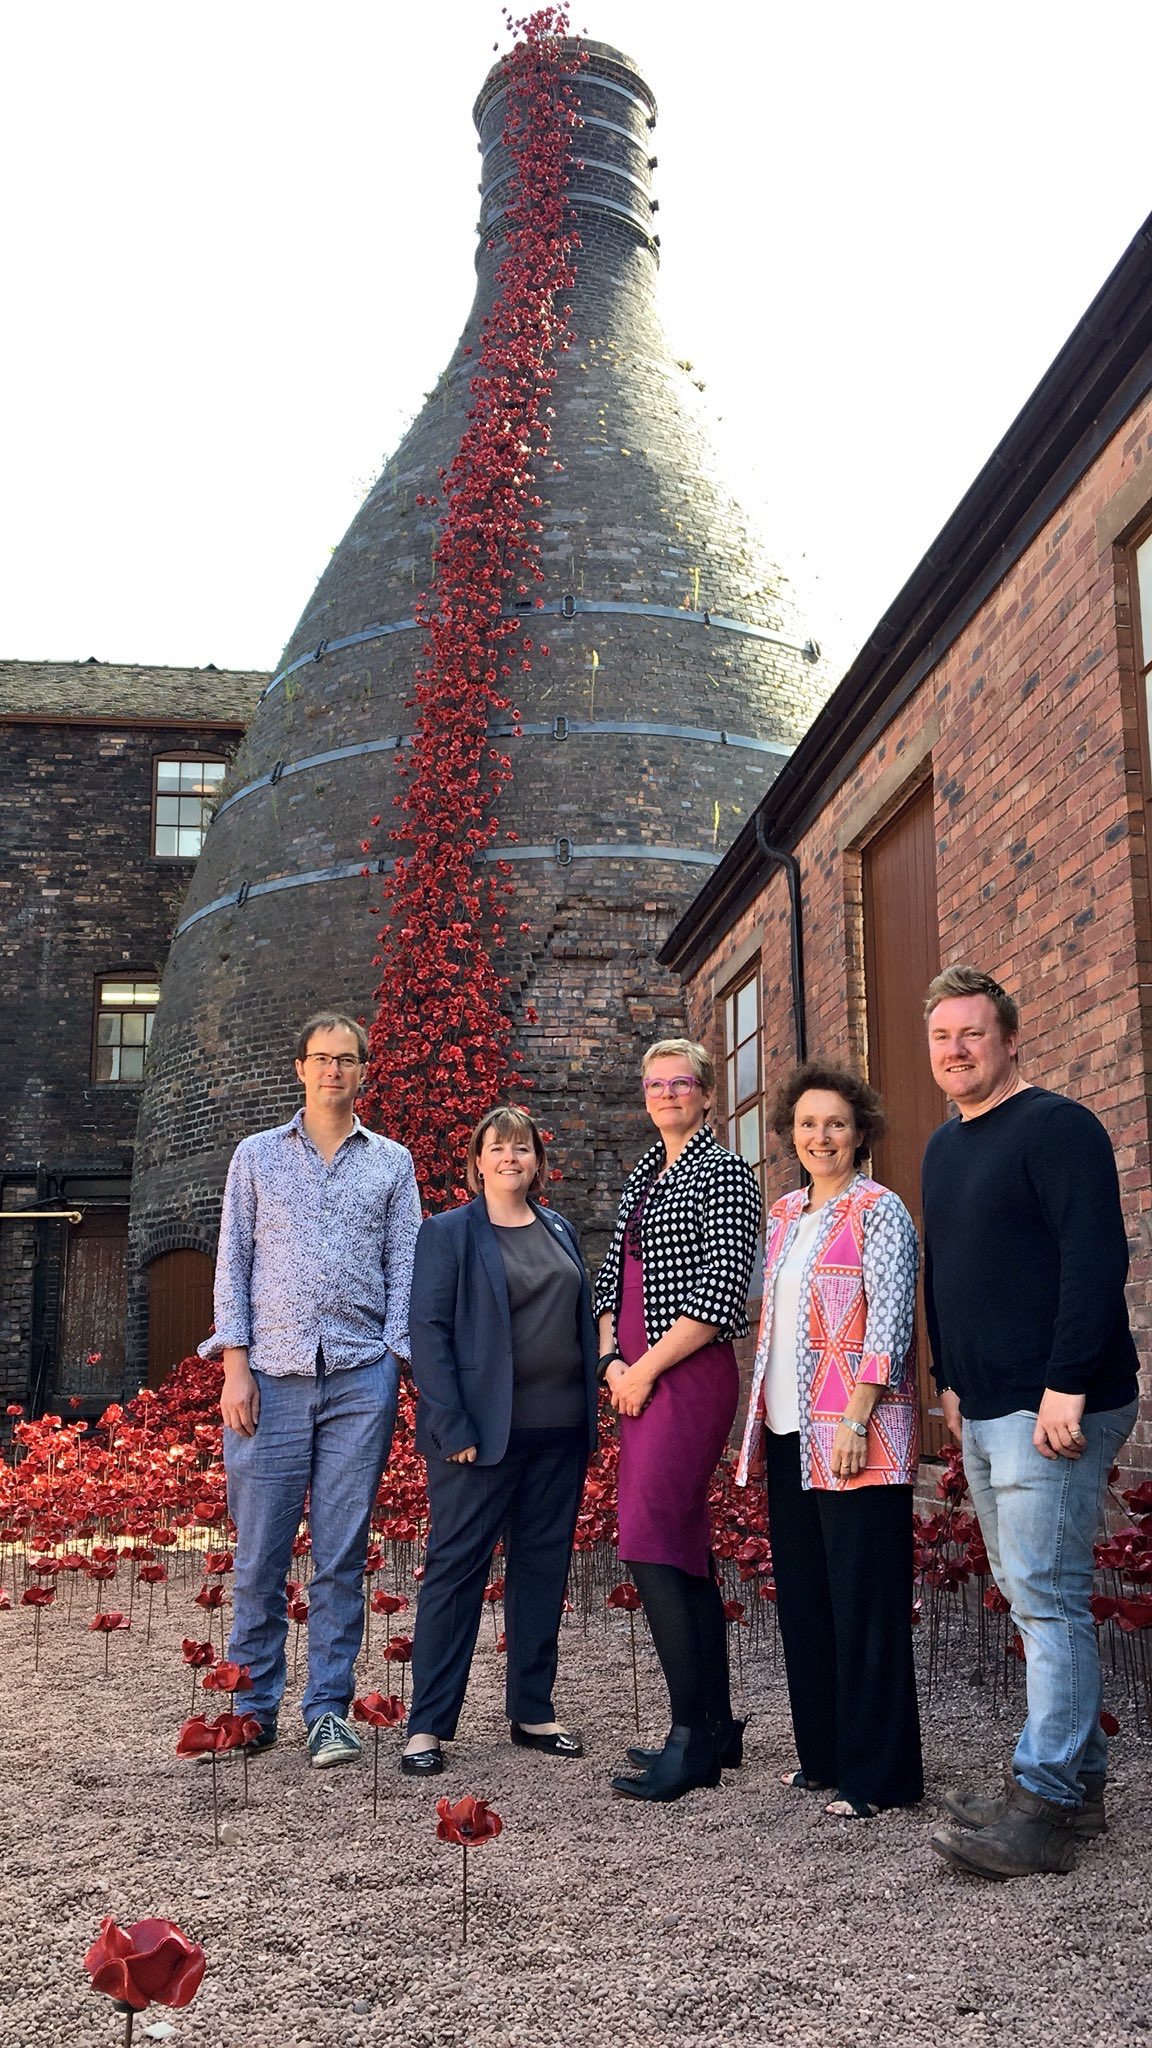 Poppies: Weeping Window at Middleport Pottery, Stoke-on-Trent